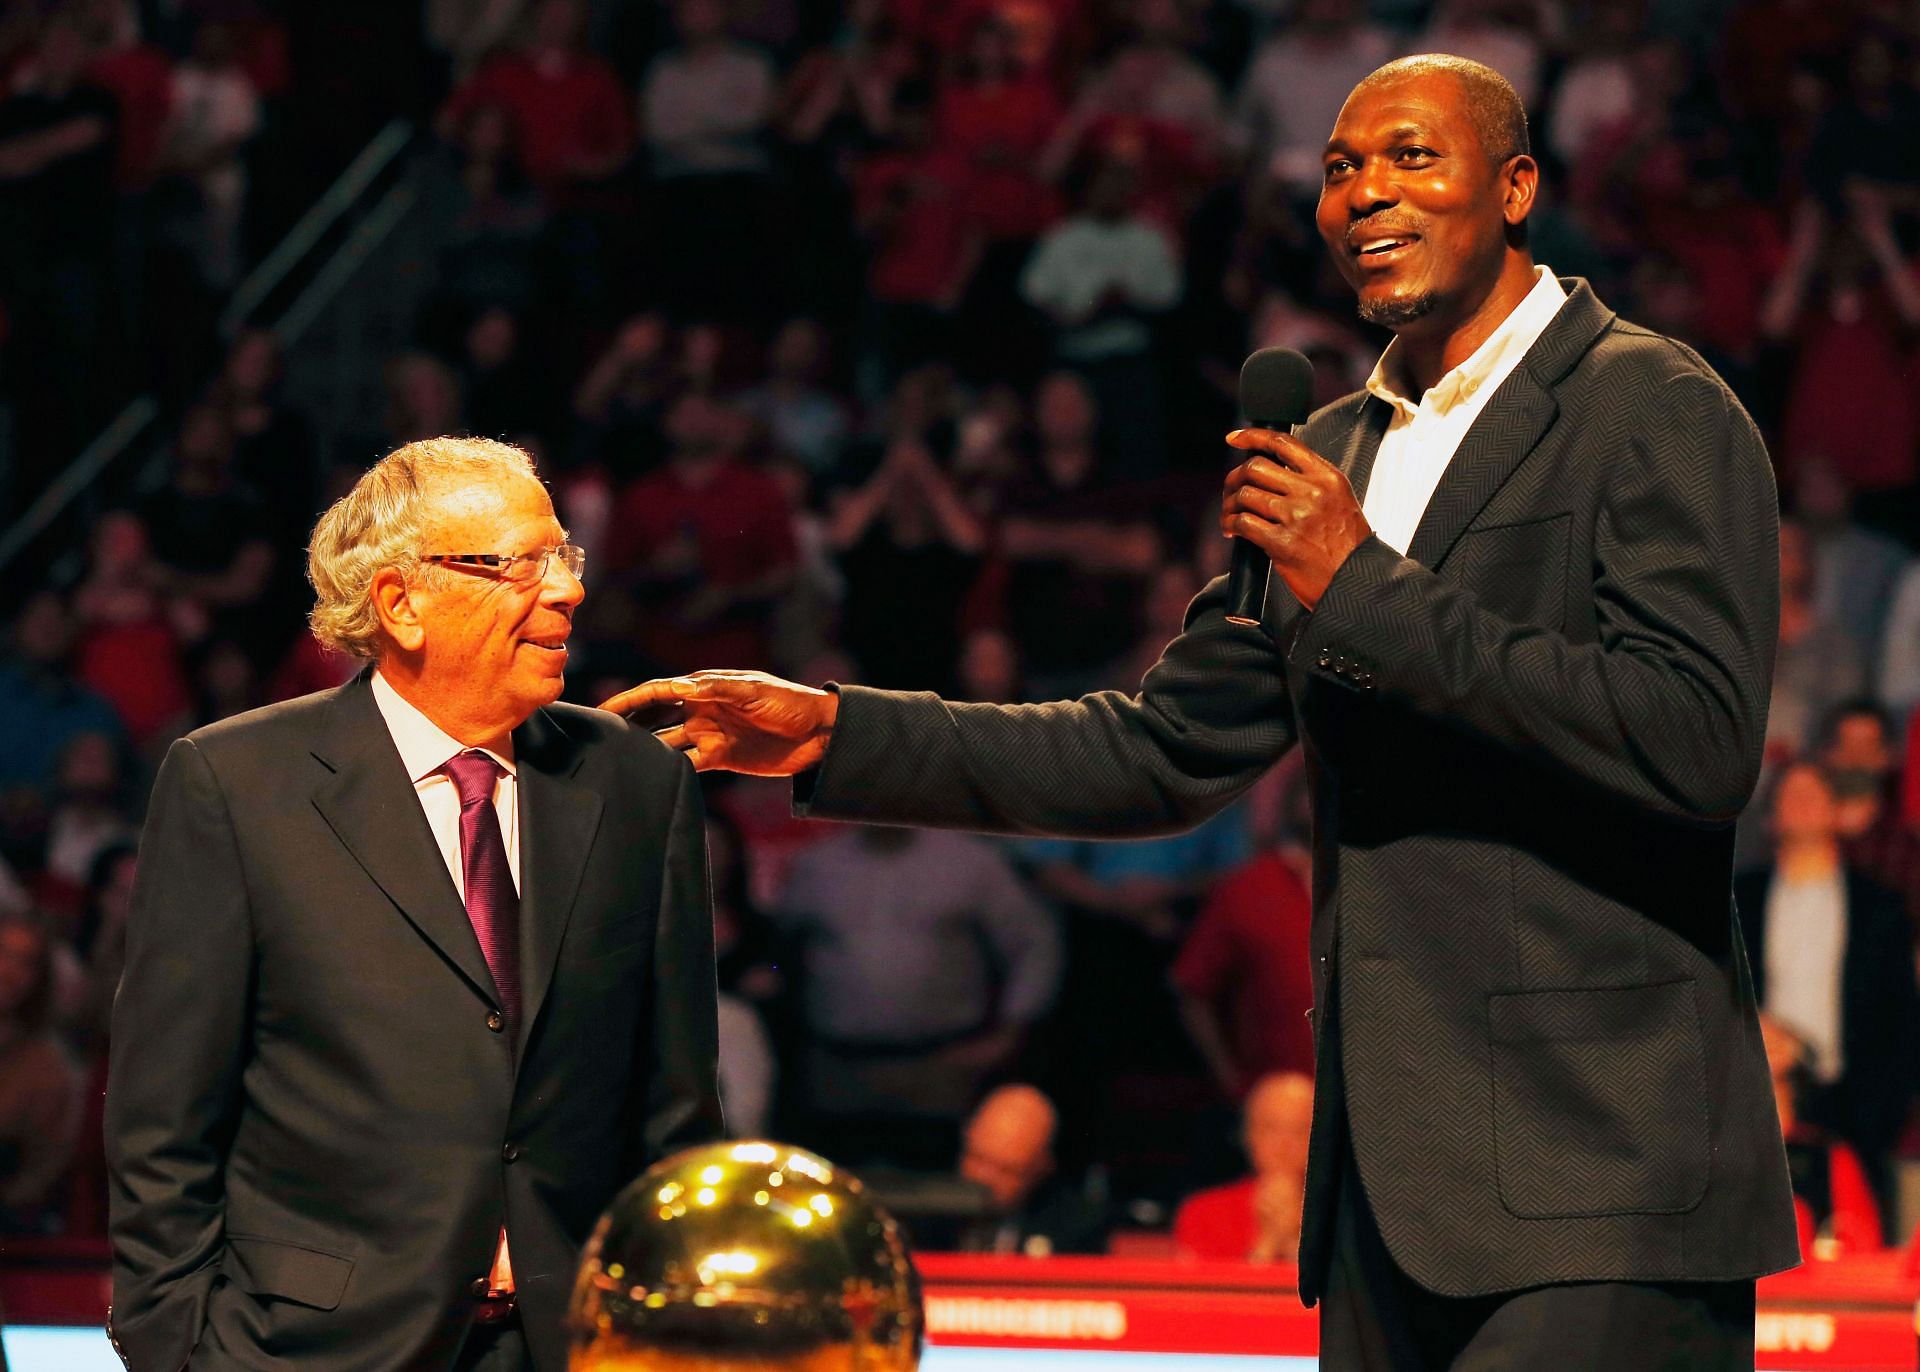 Fomer Houston Rocket Hakeem Olajuwon speaks to the crowd alongside team owner Leslie Alexander as the team honors the 20th anniversary of back-to-back NBA championships at halftime of their game against the Denver Nuggets on March 19, 2015, in Houston.